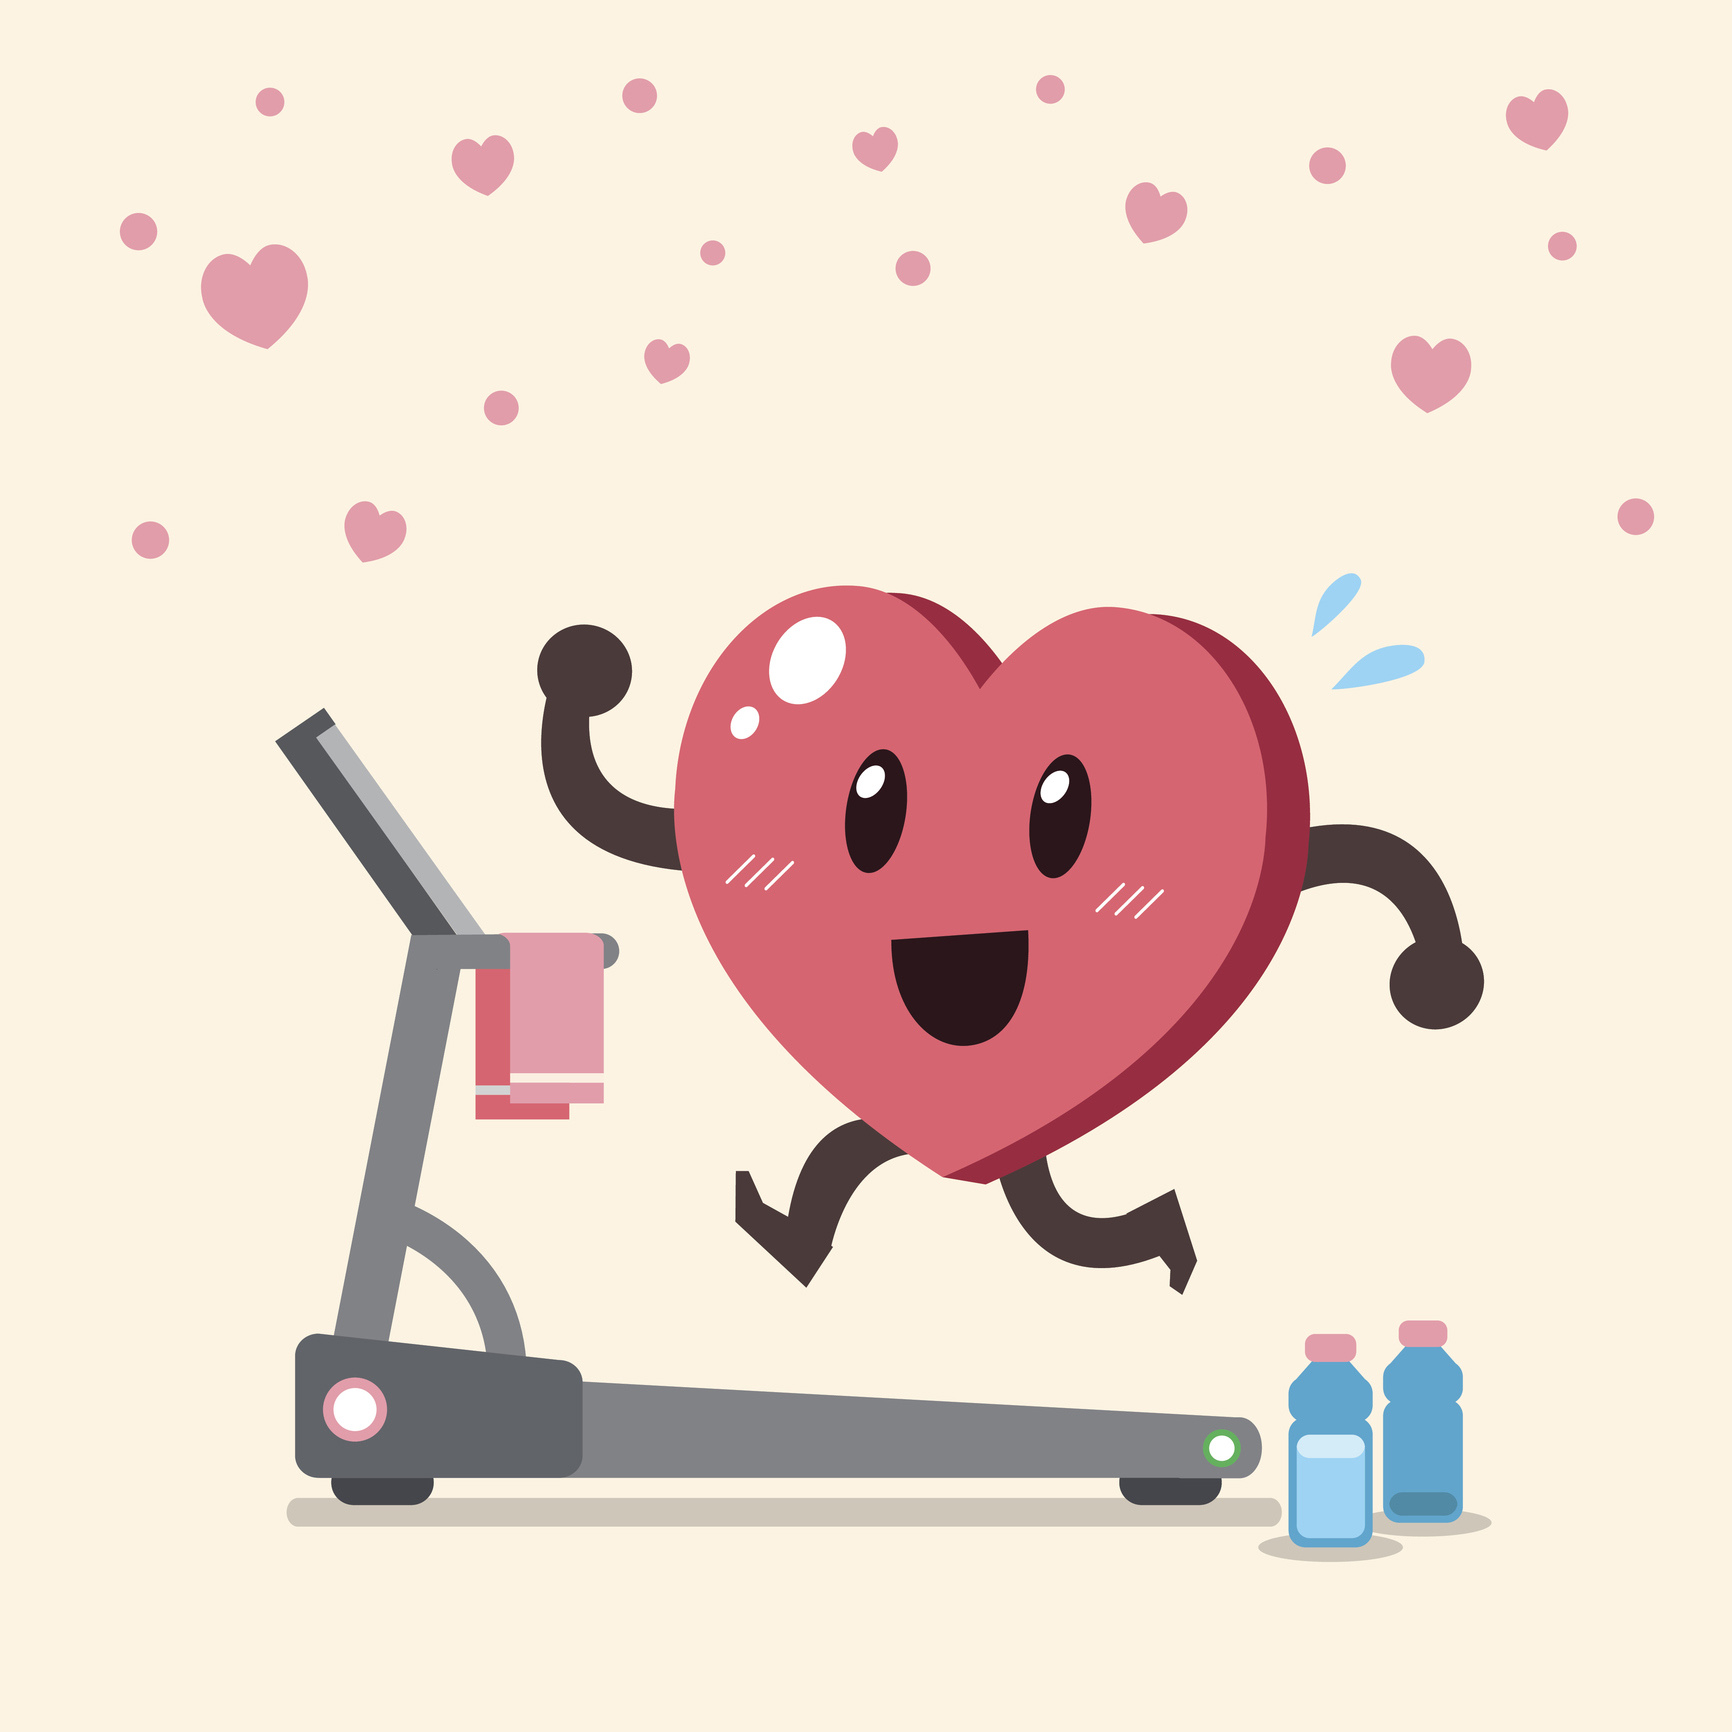 5-15-2018 Six Years of Exercise -- or Lack of It -- May Be Enough to Change Heart Failure Risk